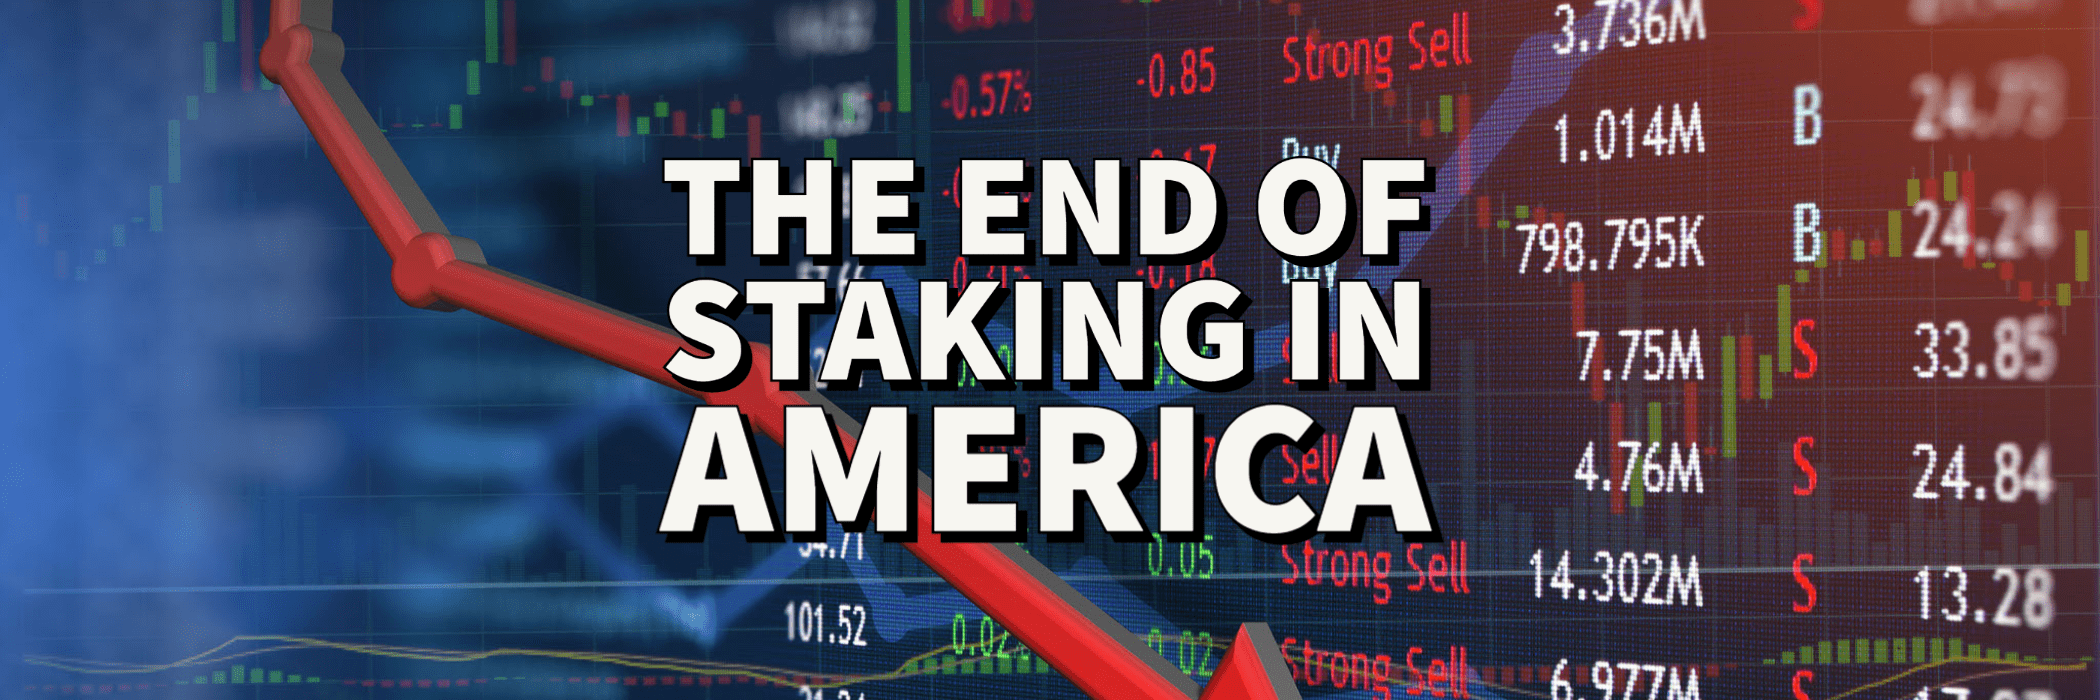 The end of crypto staking in the united states?